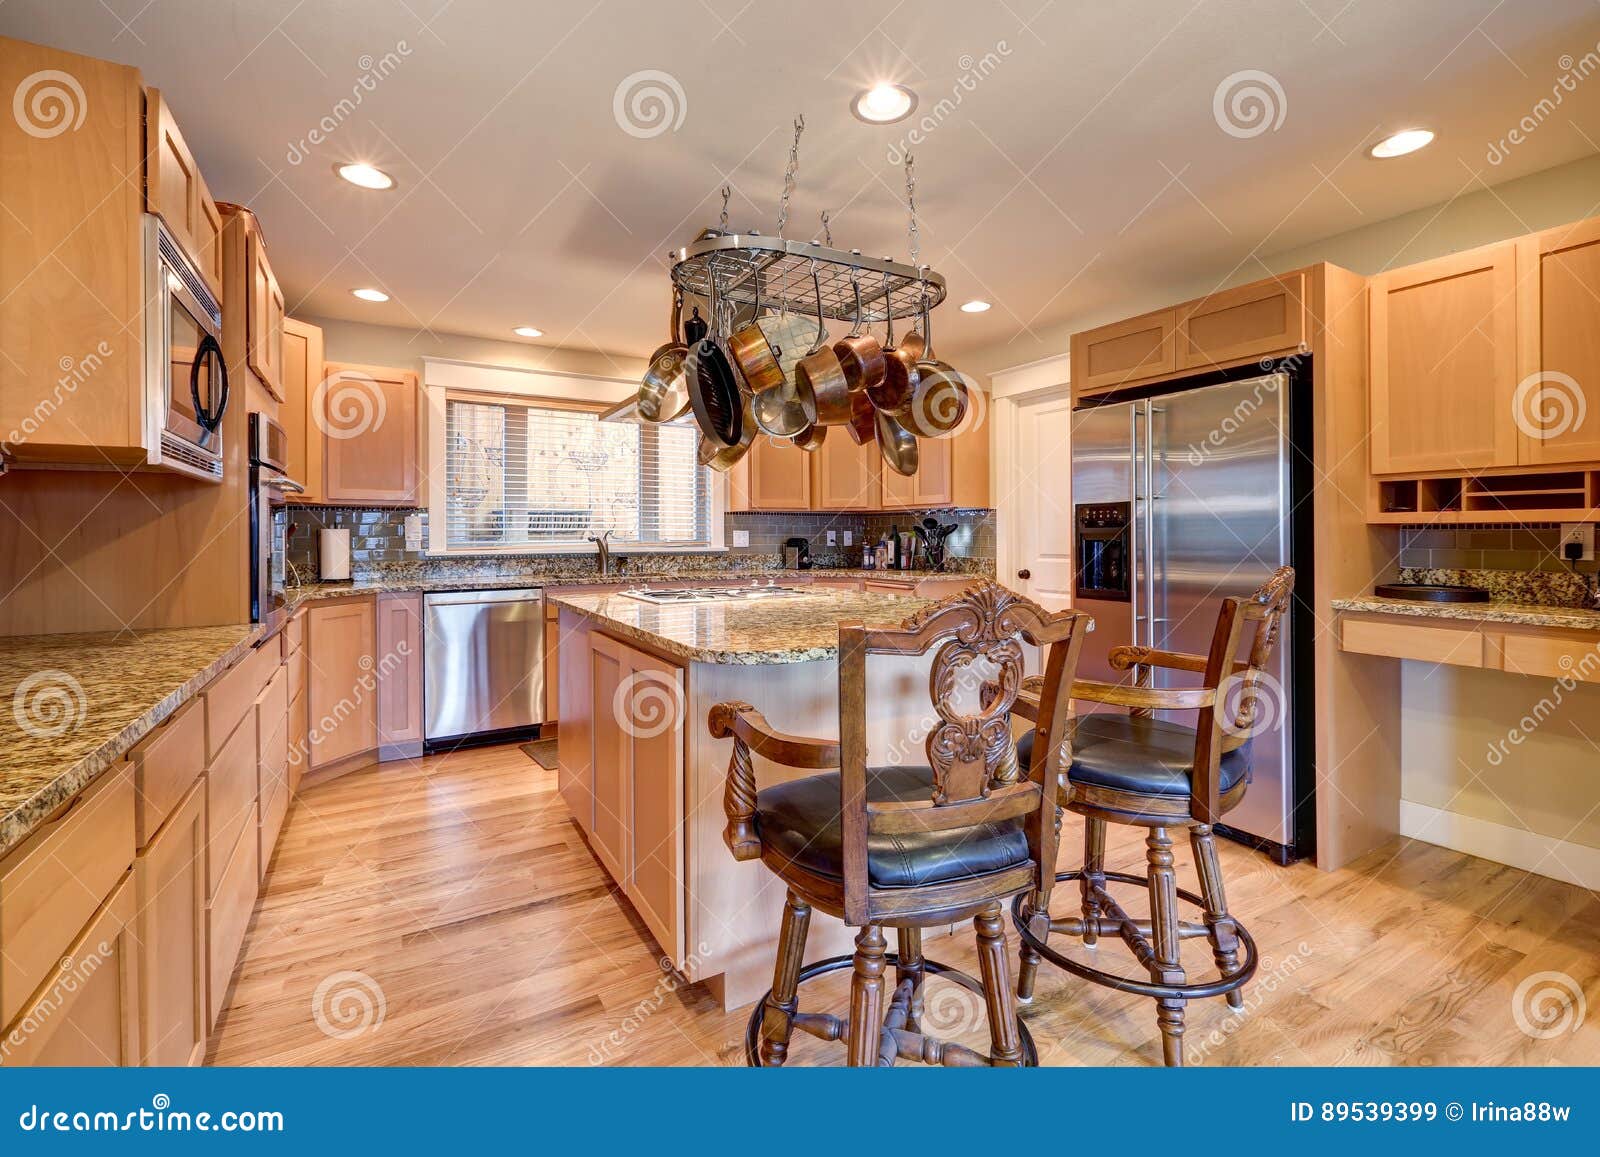 Perfectly Designed Light Kitchen With Granite Counters Stock Image